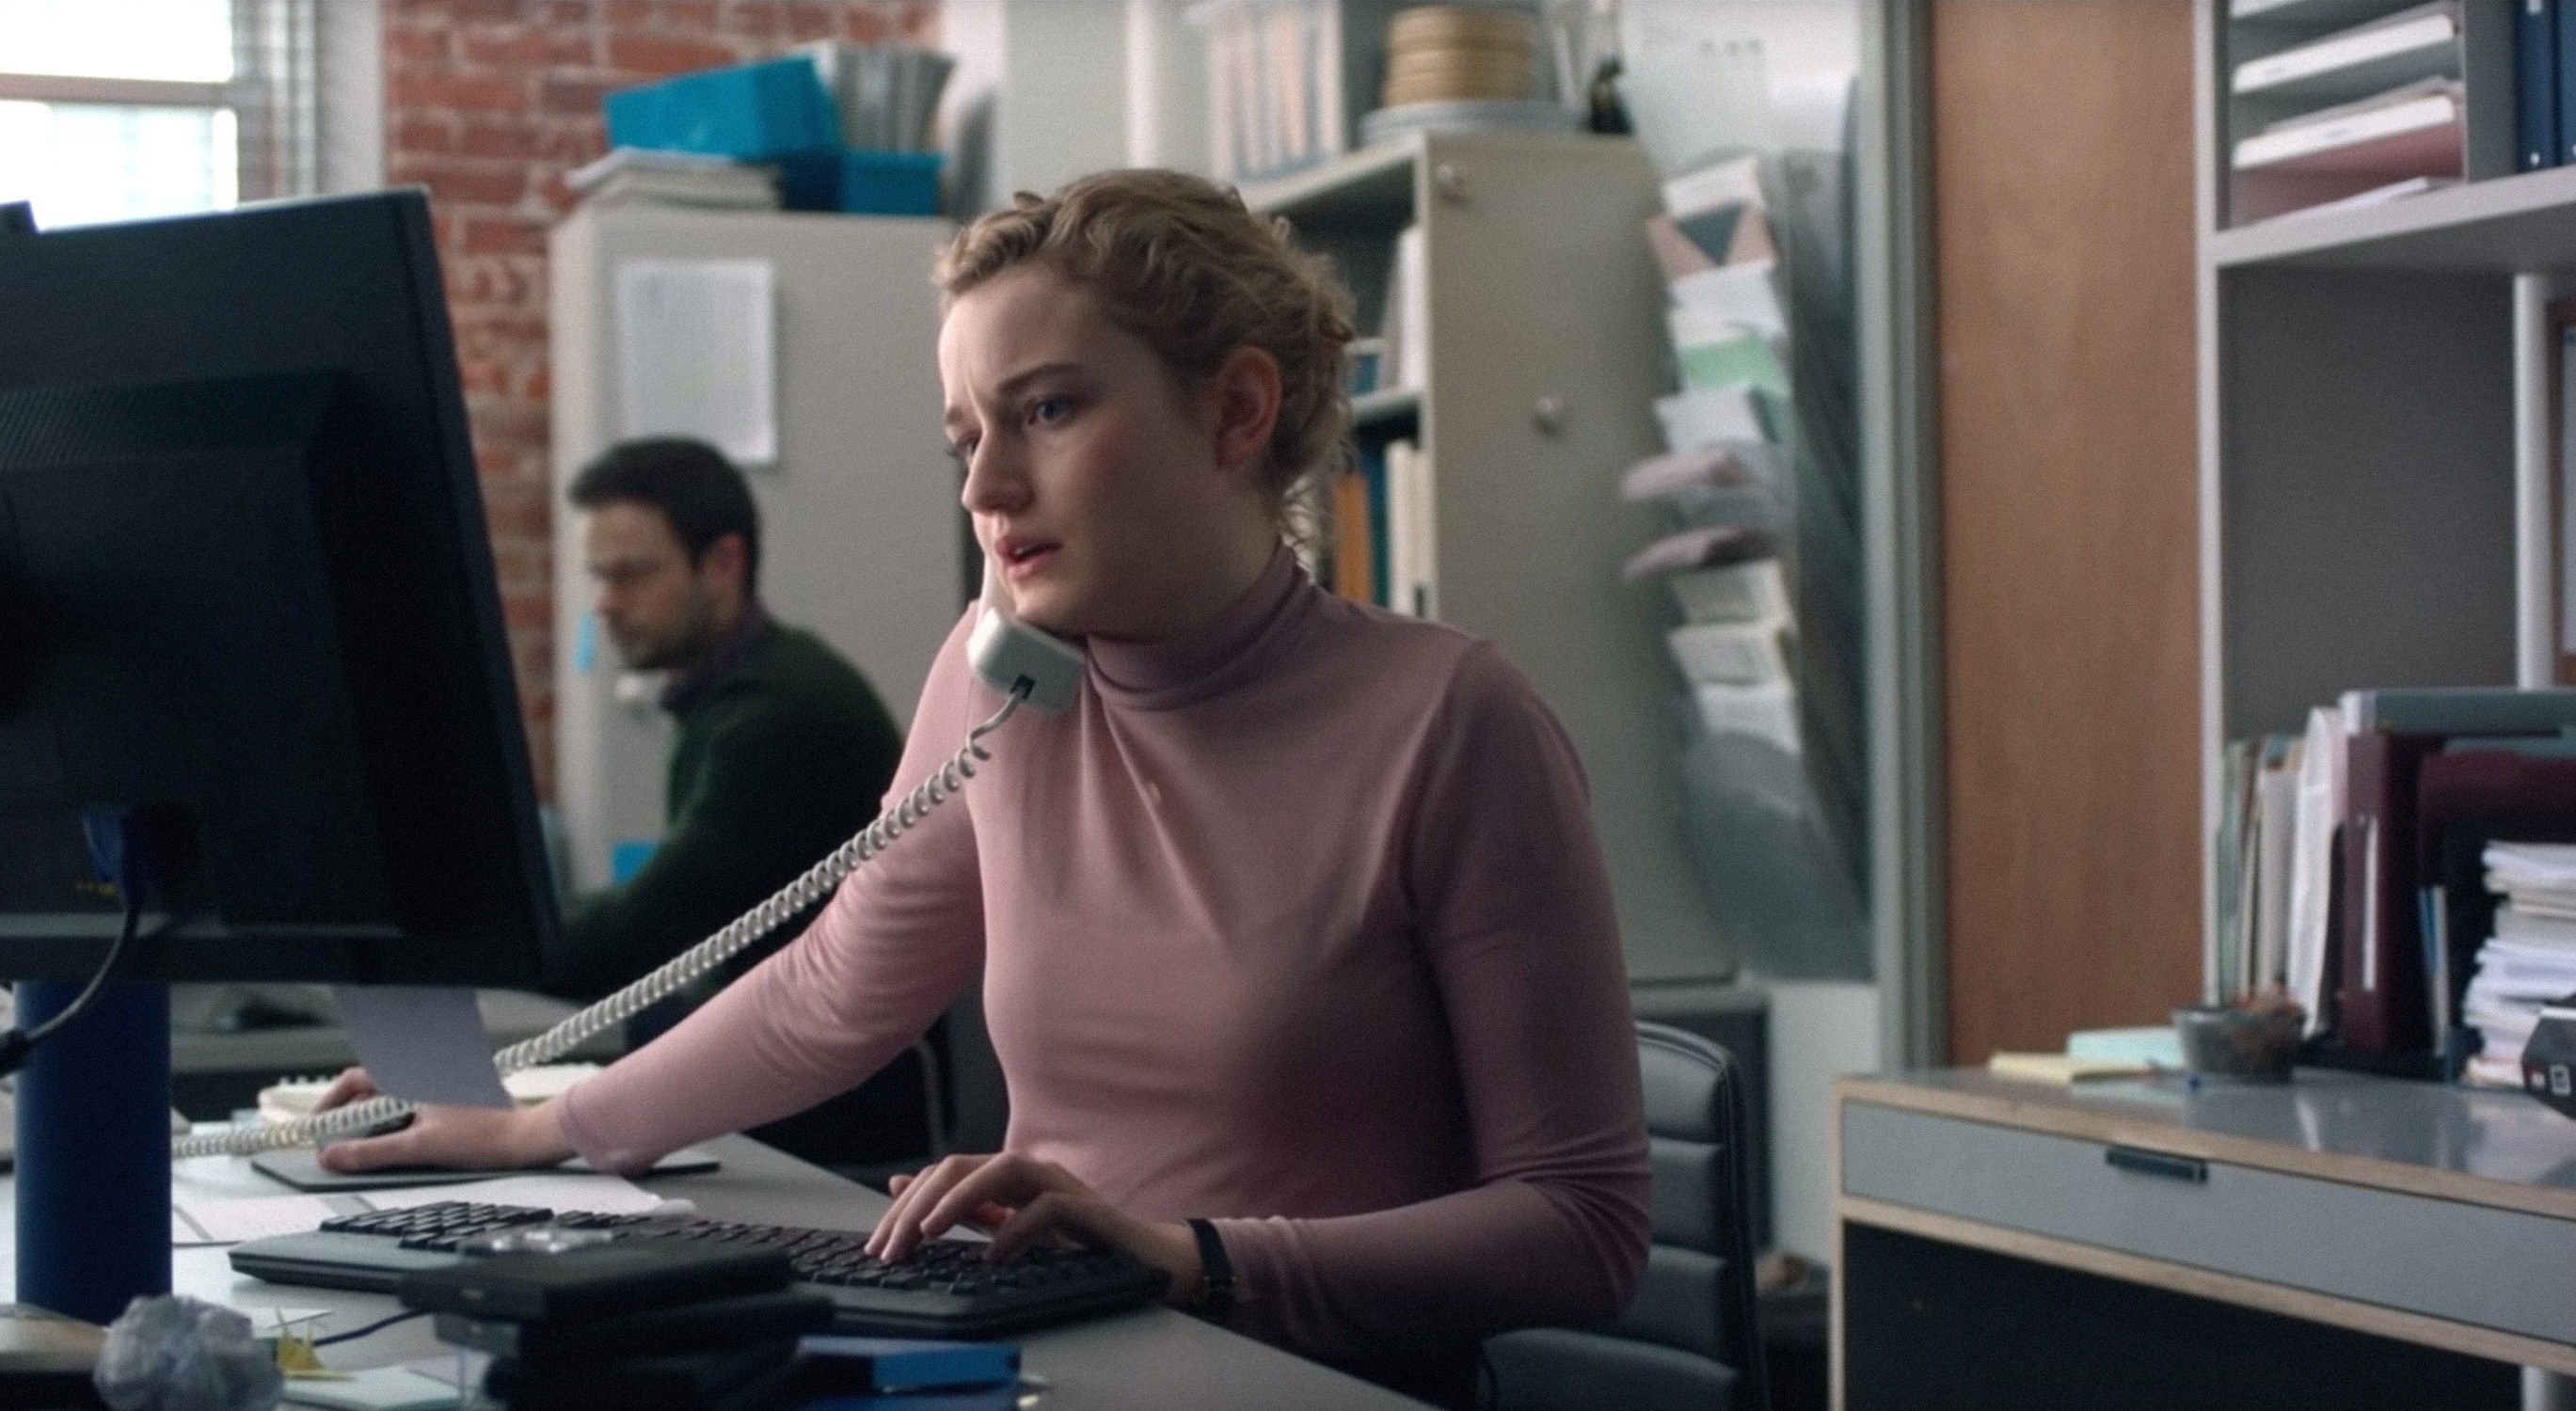 Julia Garner talking on the phone while looking at the computer at her desk